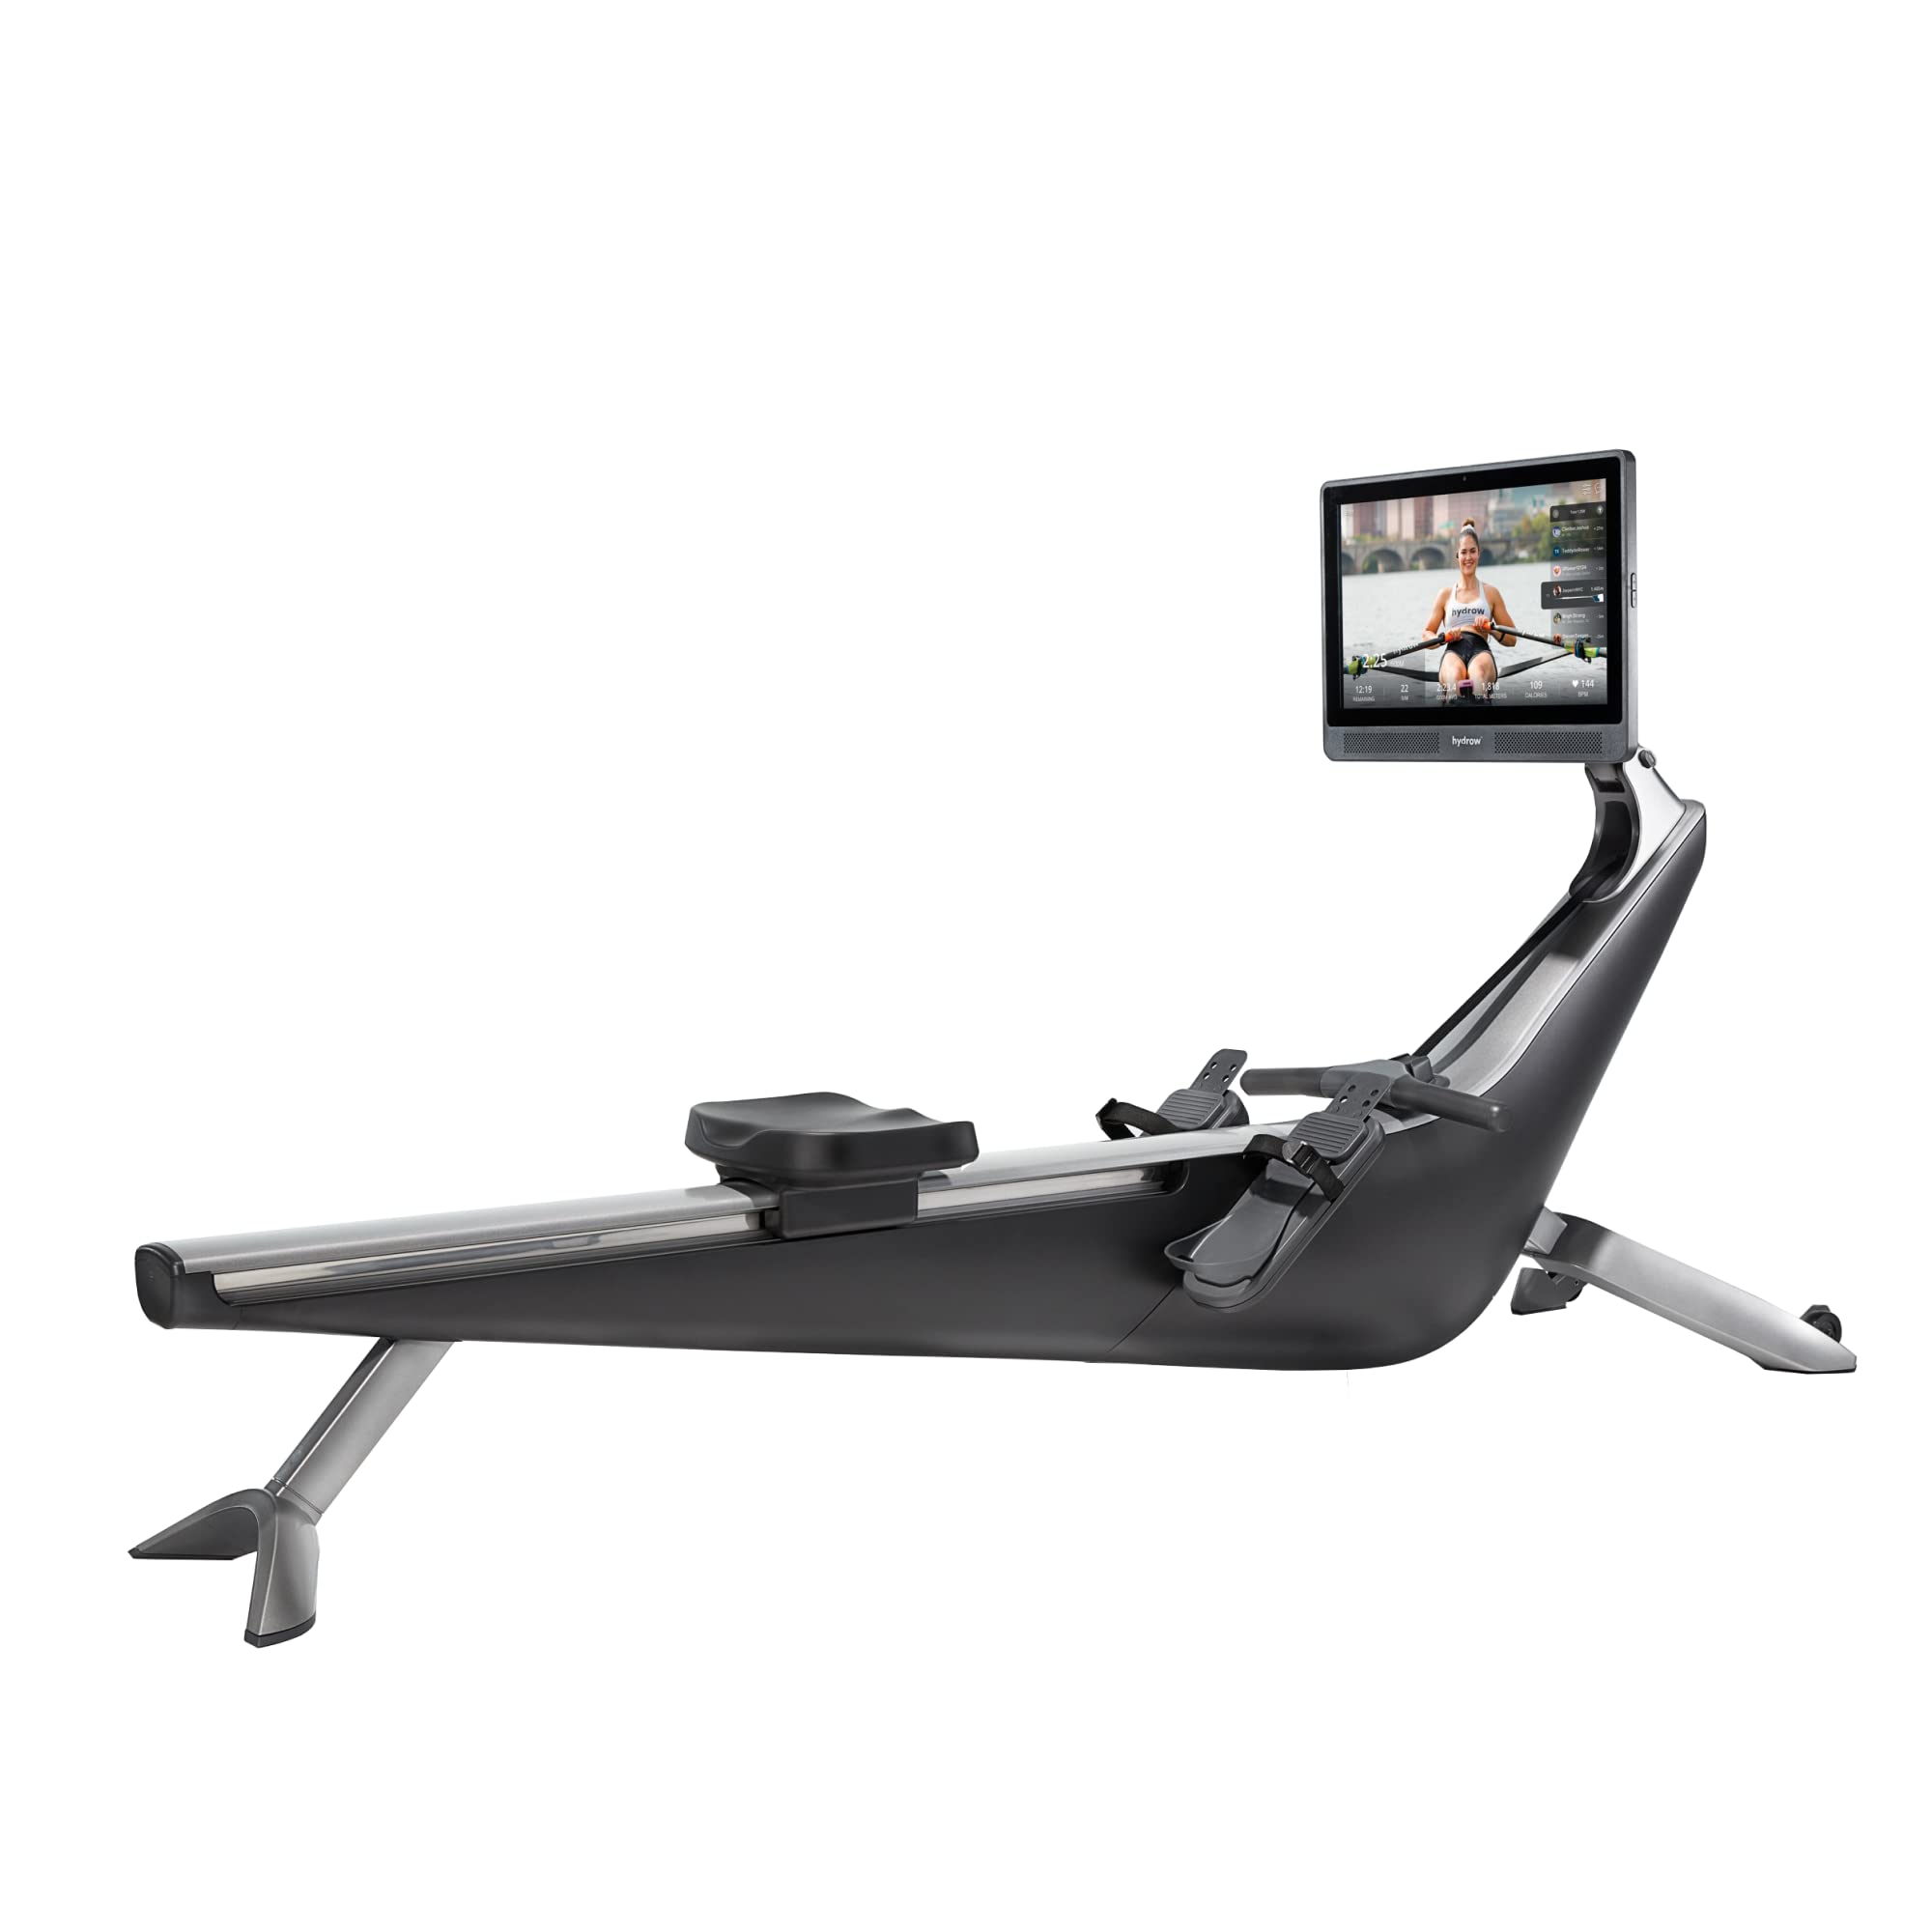 Hydrow Pro Rowing Machine with Immersive 22_ HD Rotating Screen Stows Upright _ Live and On Demand at Home Workouts, Subscription Required>